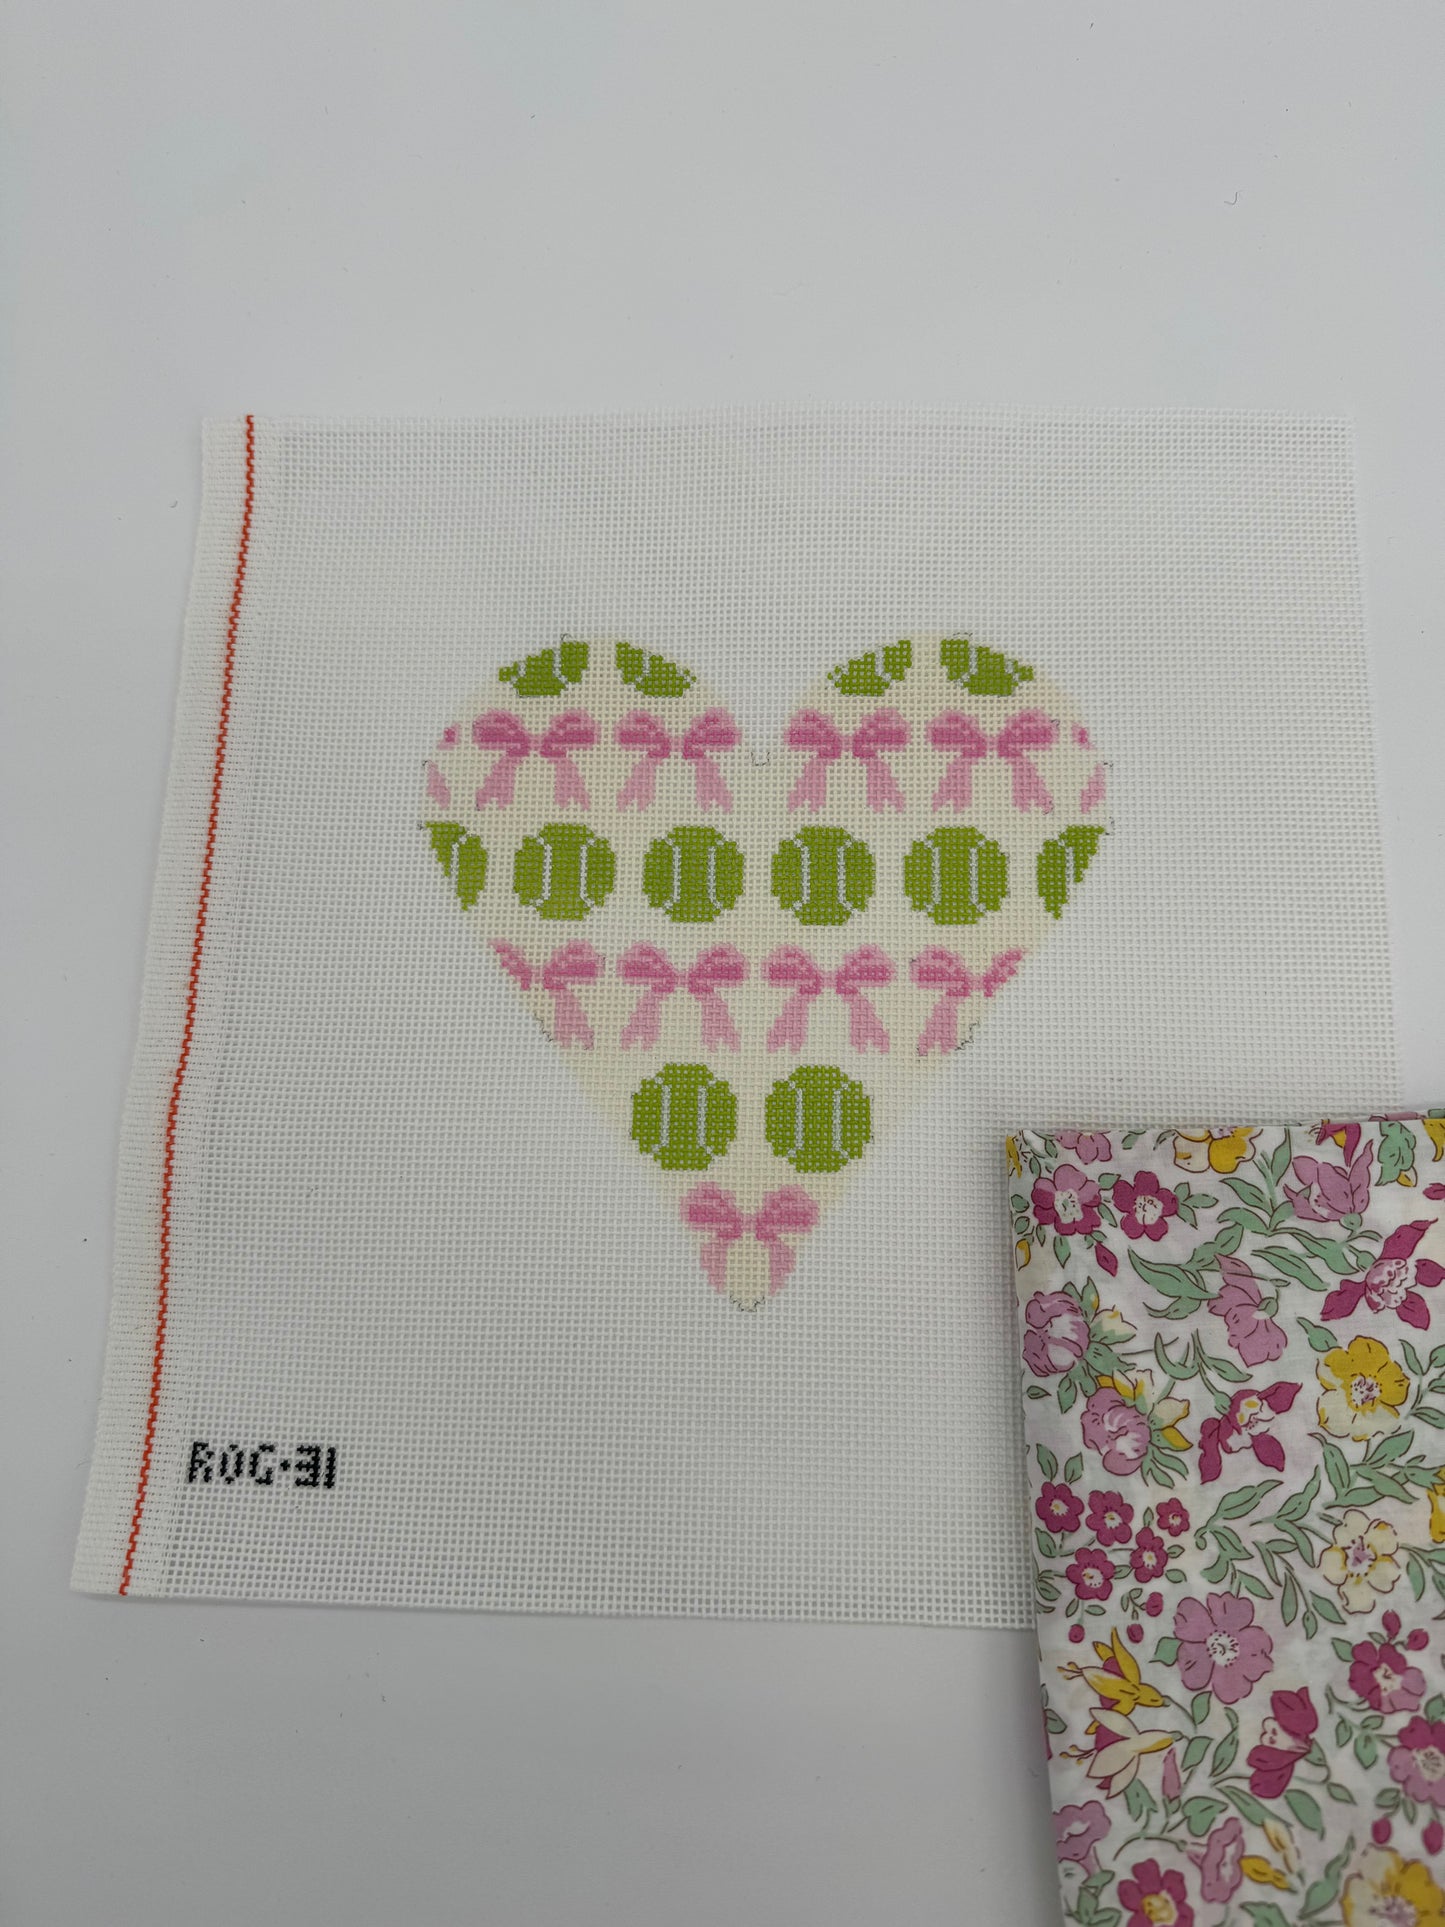 Tennis Ball and Bow Heart Needlepoint Canvas